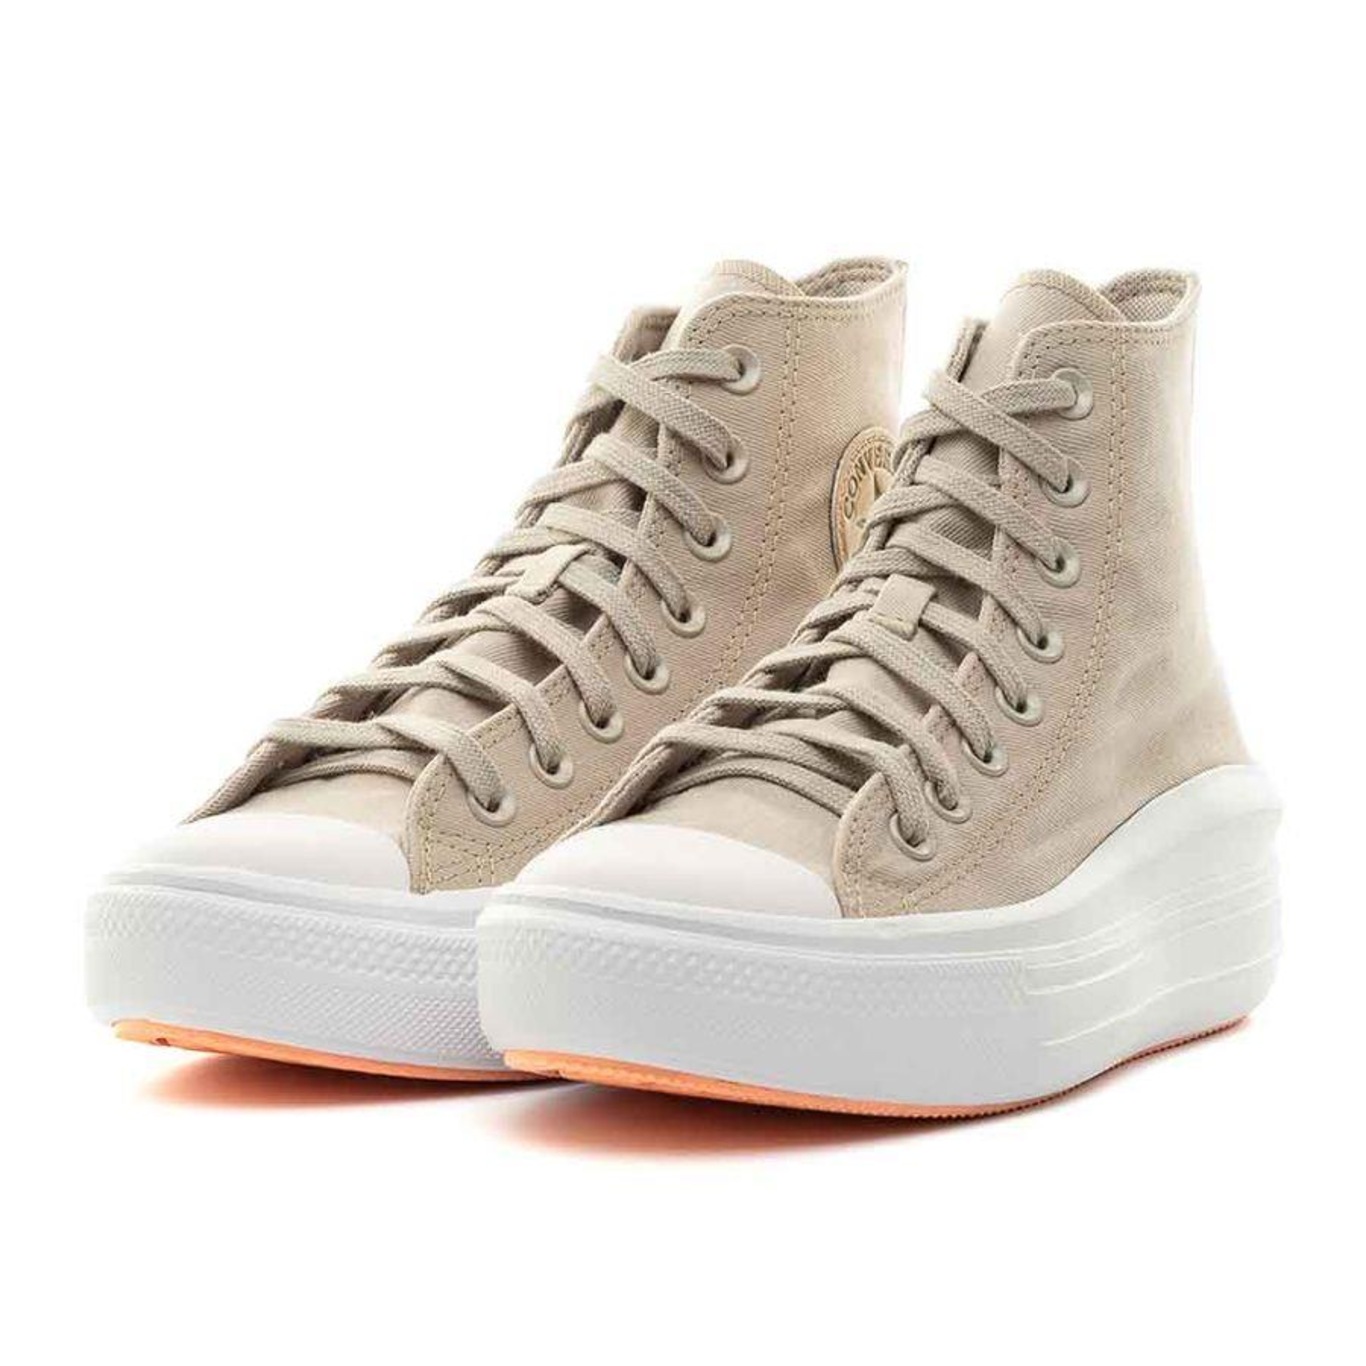 Tênis Converse Chuck Taylor All Star Move Hi Authentic Glam Bege